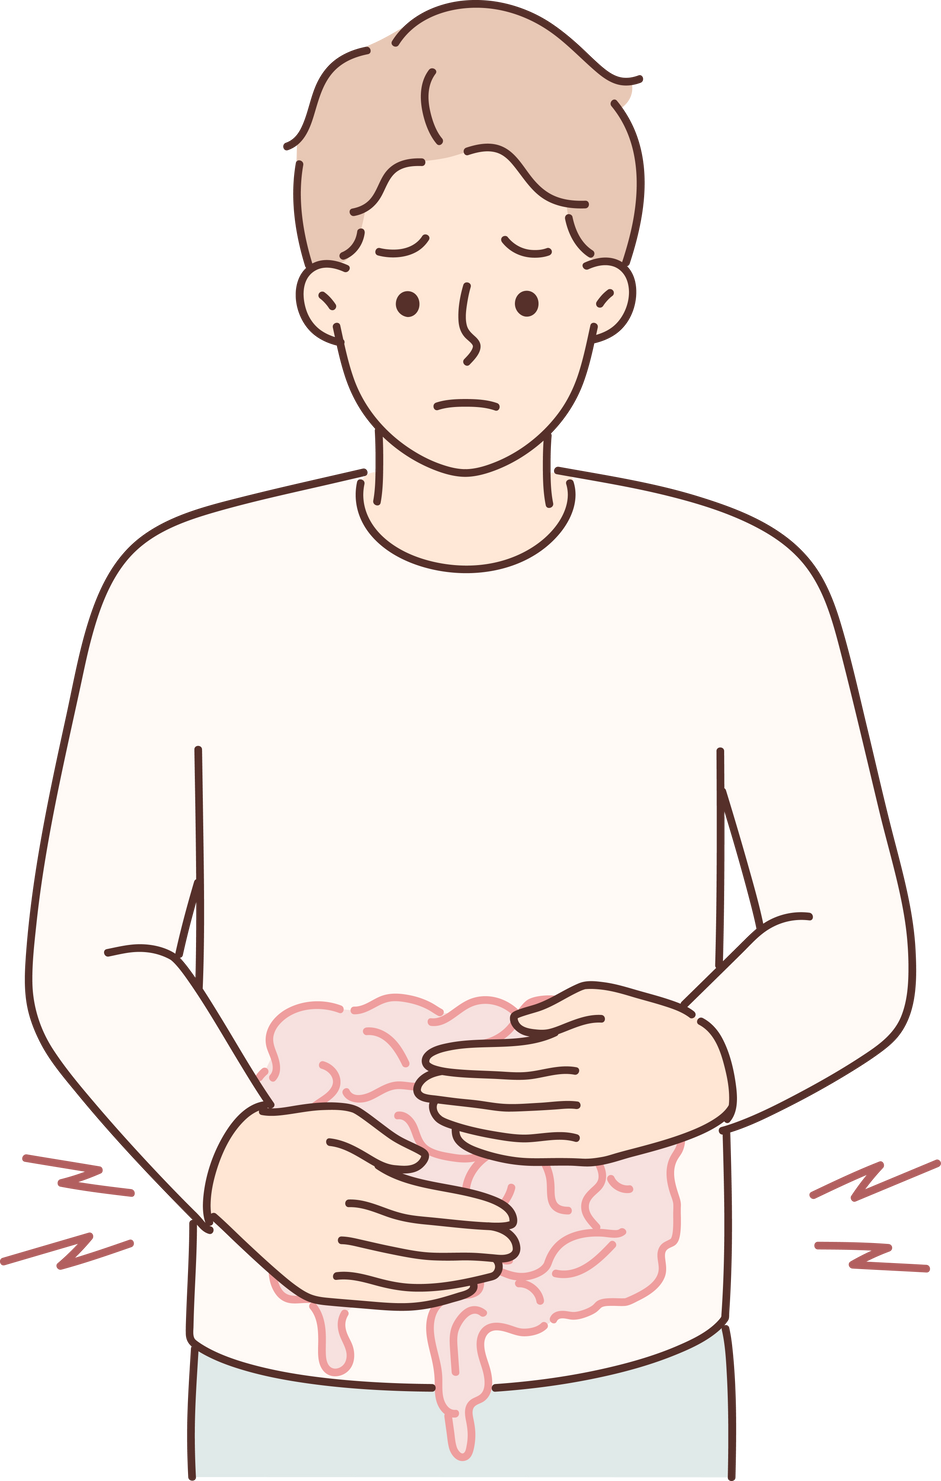 Man with hands on his abdomen showing gastrointestinal discomfort. Mental health offers treatments for gut disorders such as IBS, constipation, diarrhea, gas, bloating, and heartburn.